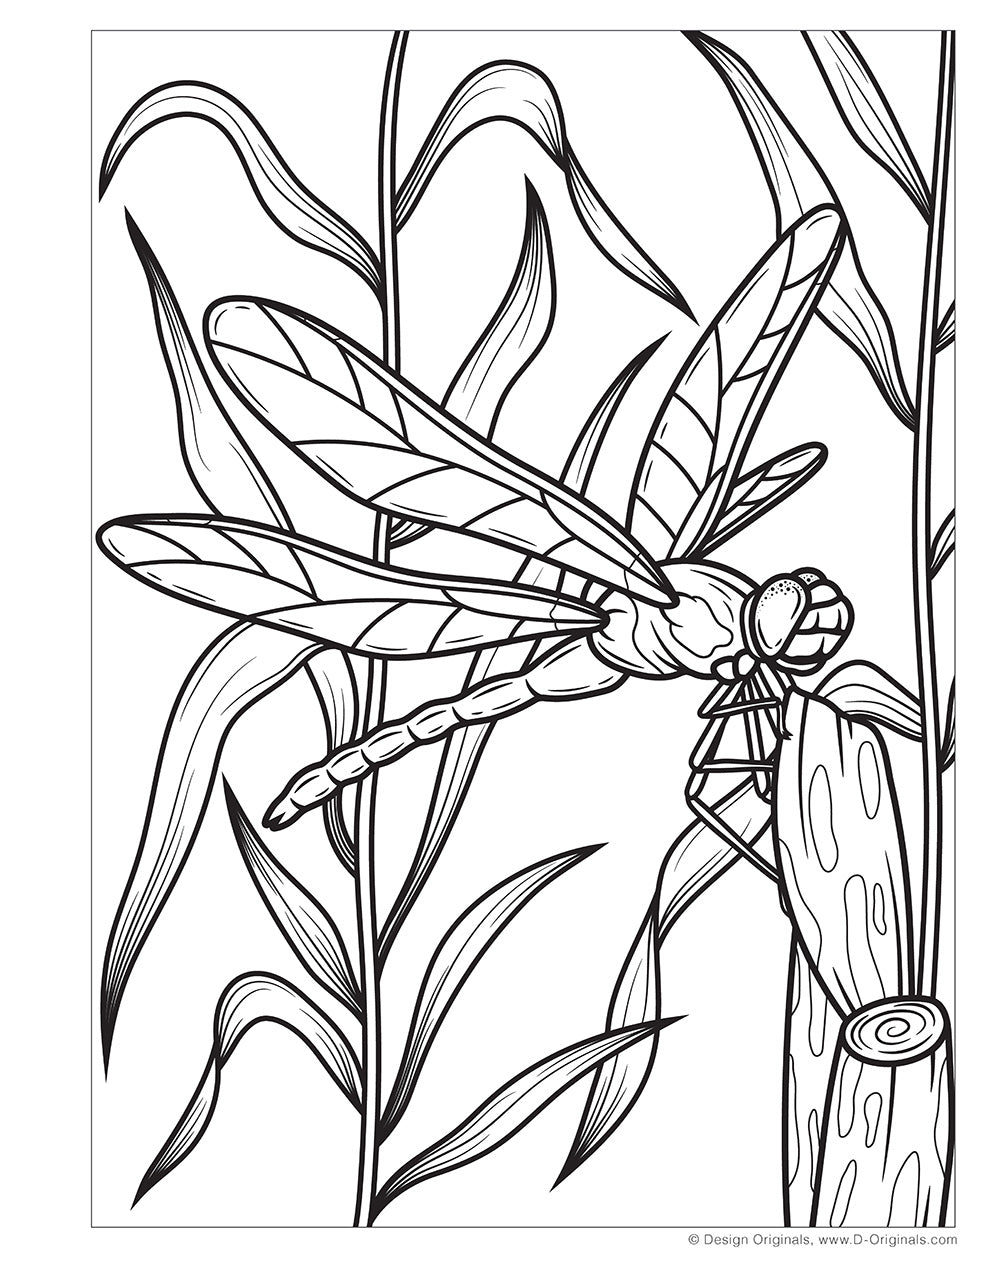 Super Cool Bugs and Spiders Coloring Book